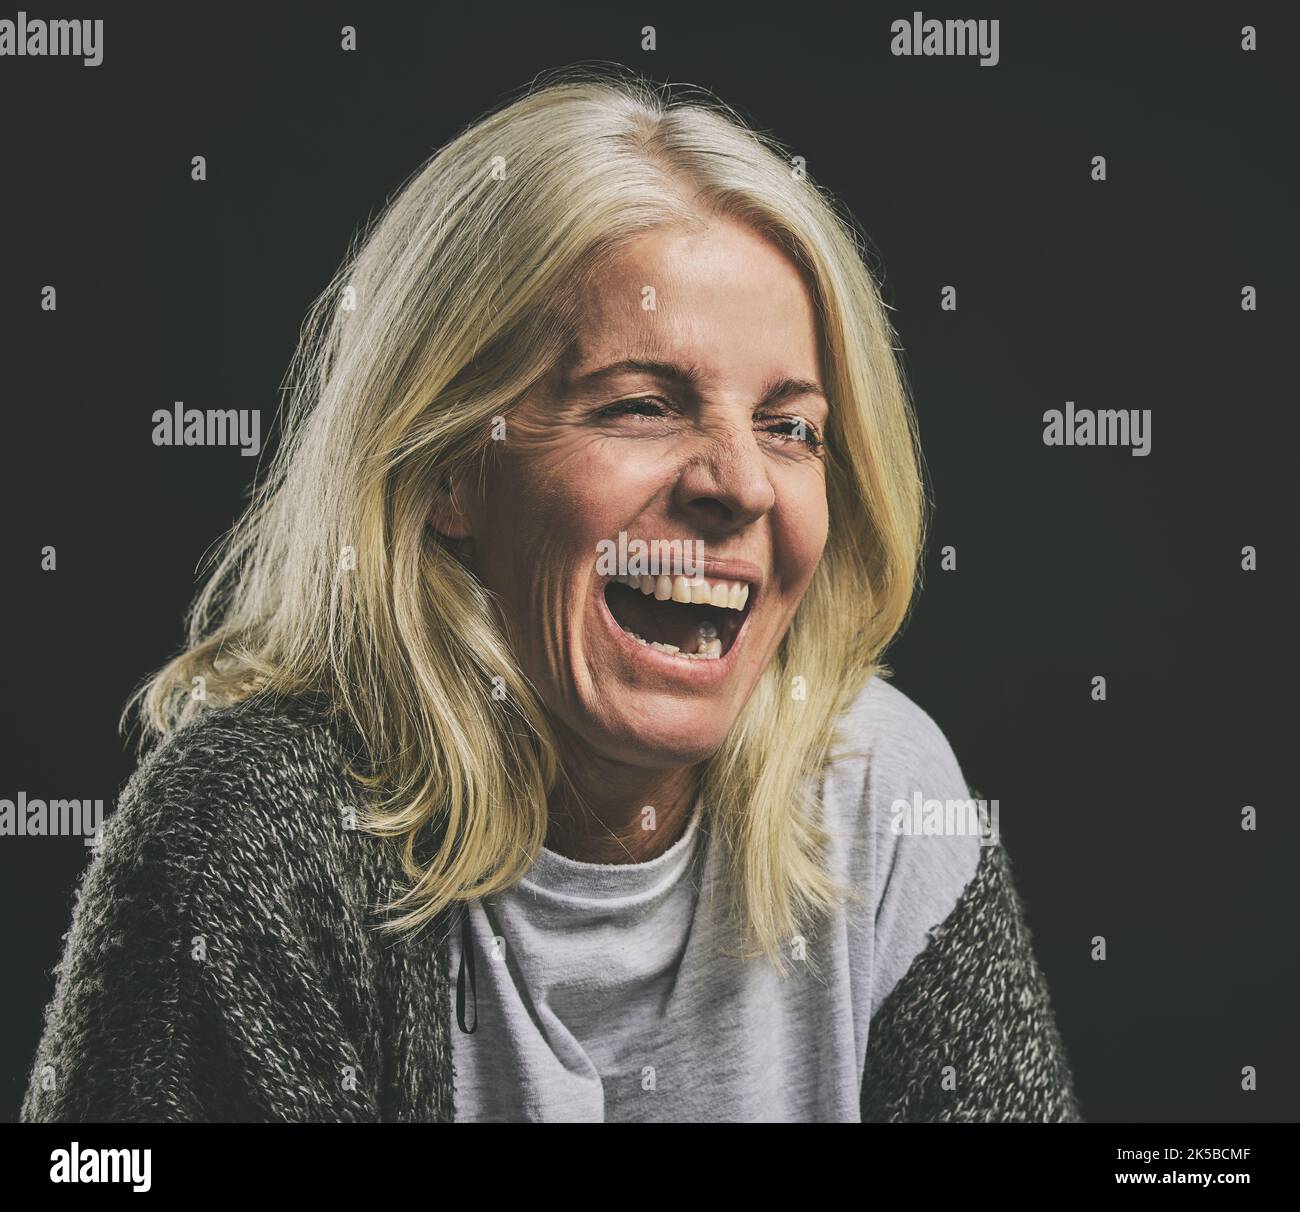 Mental health, depression and woman with bipolar laughing in dark studio. Lady with schizophrenia, anxiety and mental illness with laugh expression Stock Photo